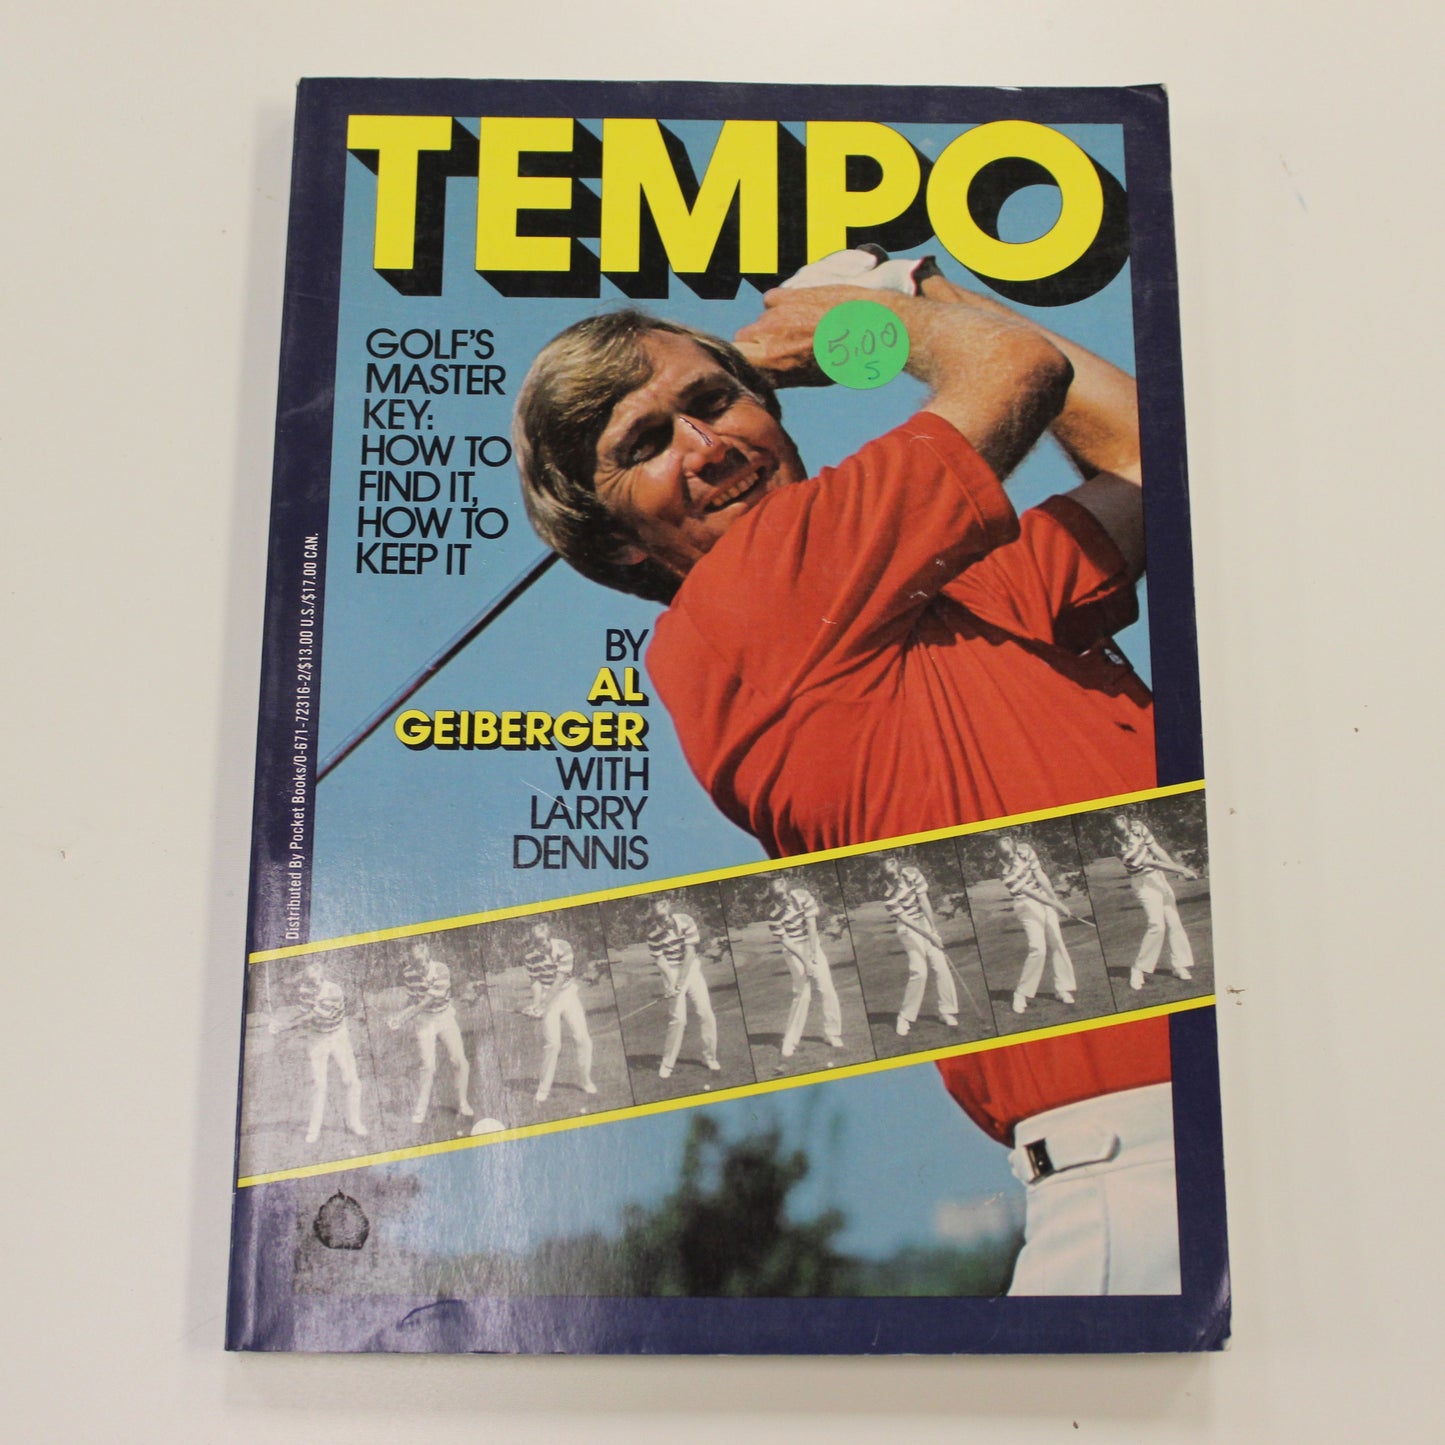 TEMPO GOLF'S MASTER KEY: HOW TO FIND IT, HOW TO KEEP IT